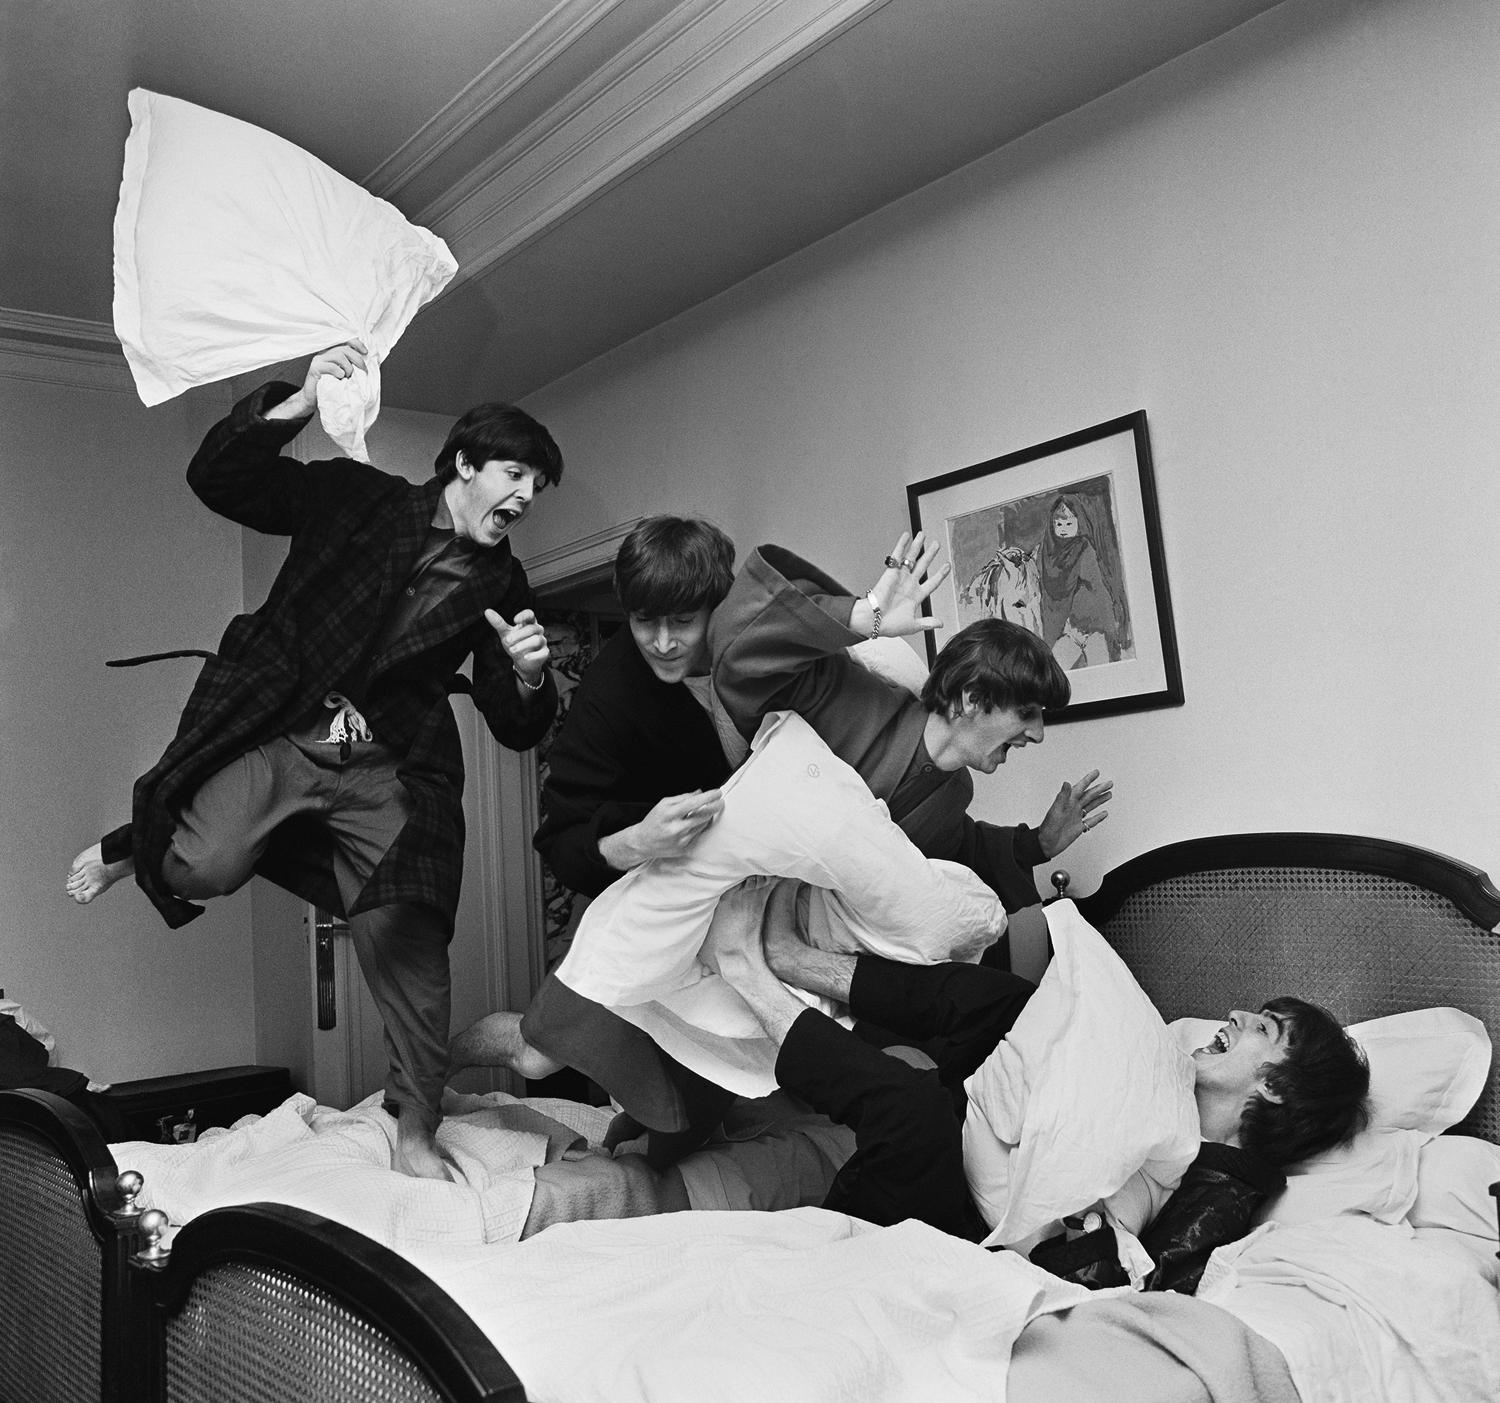 the pillow fight